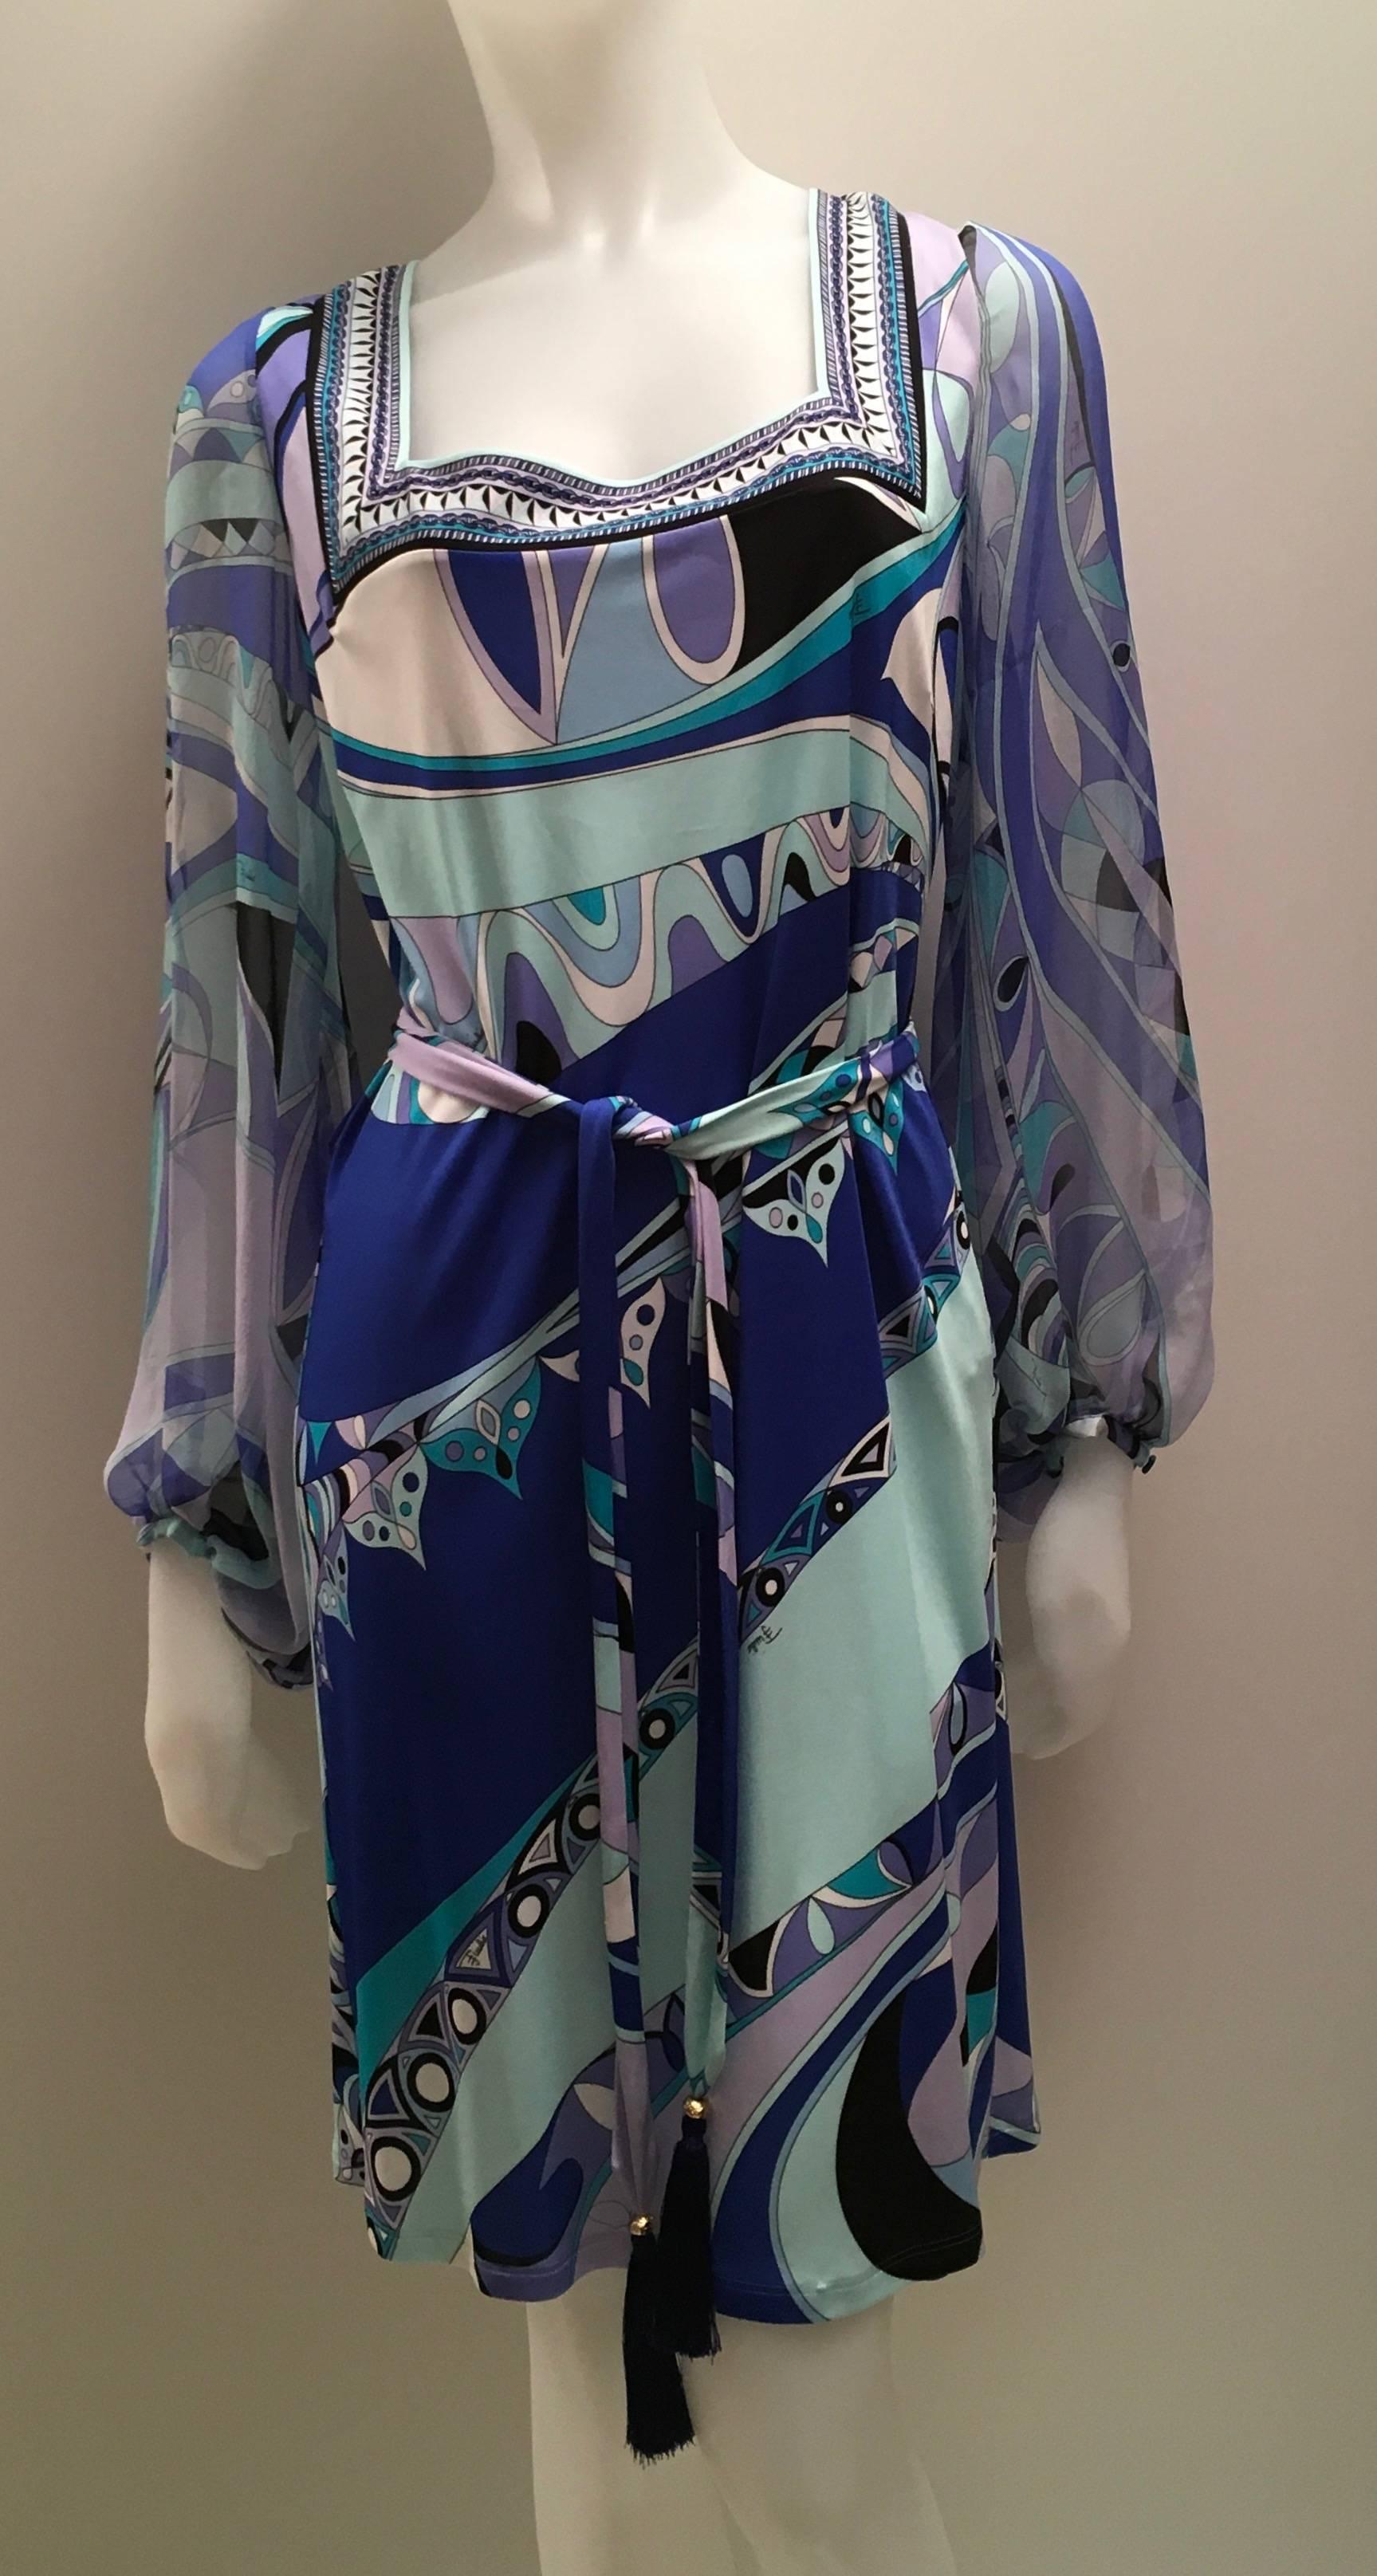 Emilio Pucci New Dress with belt 
Magnificent  Retail over $2000.00
Beautiful new Pucci dress with matching belt and Chiffon sleeves.
This beautiful dress is Pucci at its finest
The dress runs small and is meant to be worn loose
The measurements are